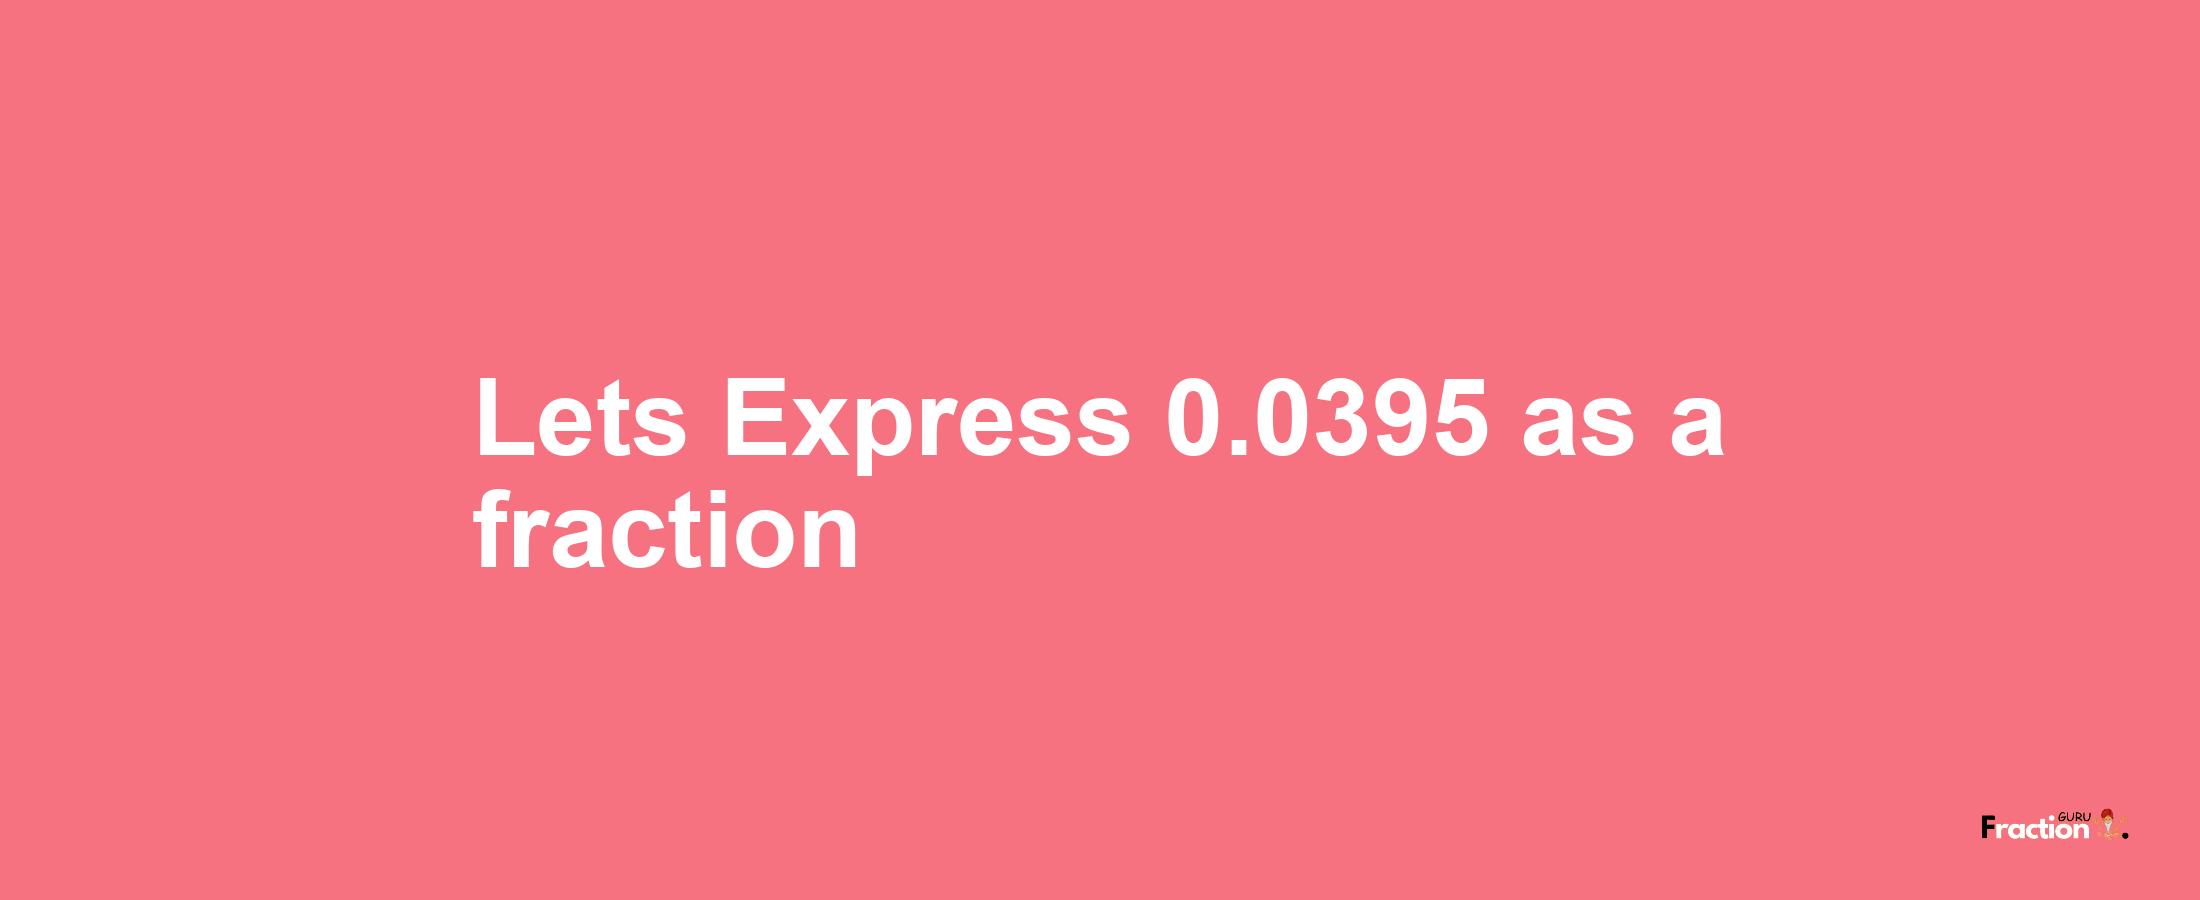 Lets Express 0.0395 as afraction